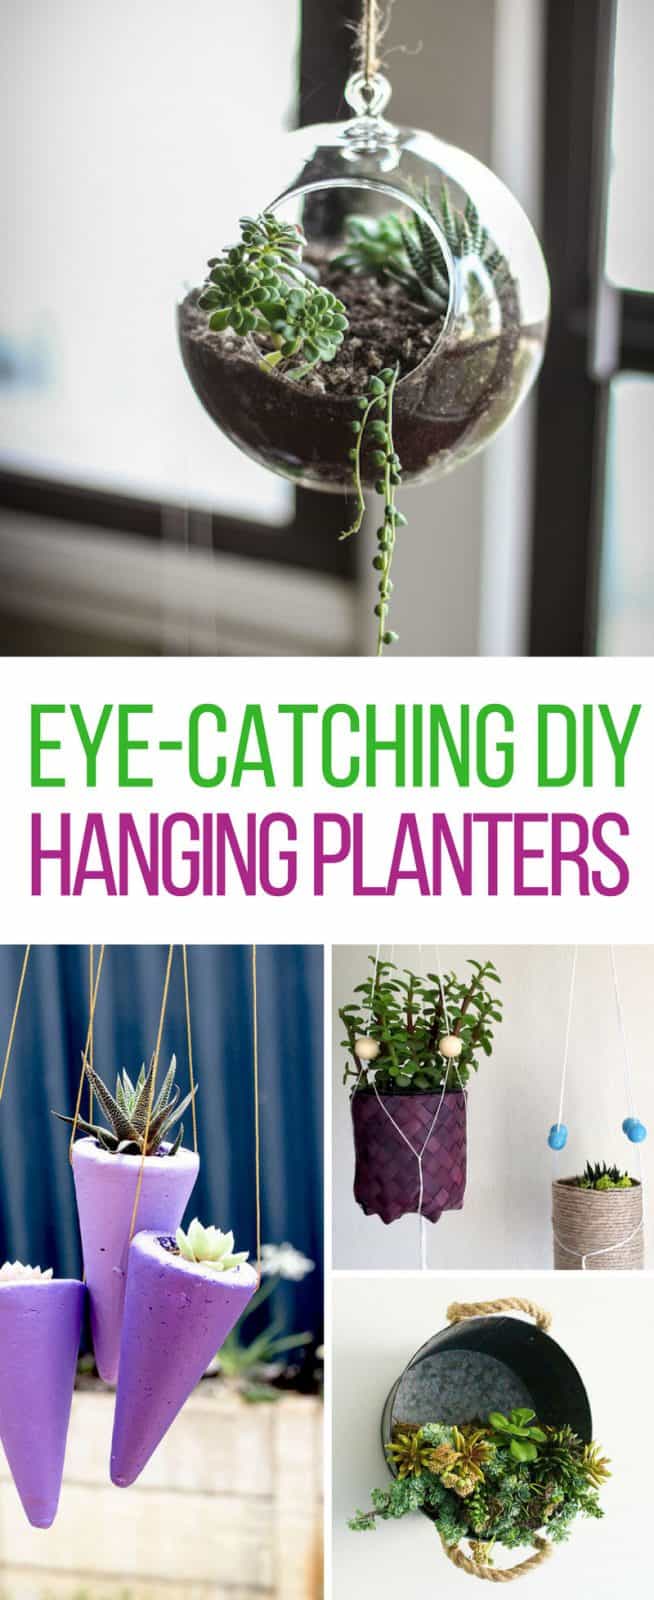 So many brilliant DIY hanging planters! Thanks for sharing!